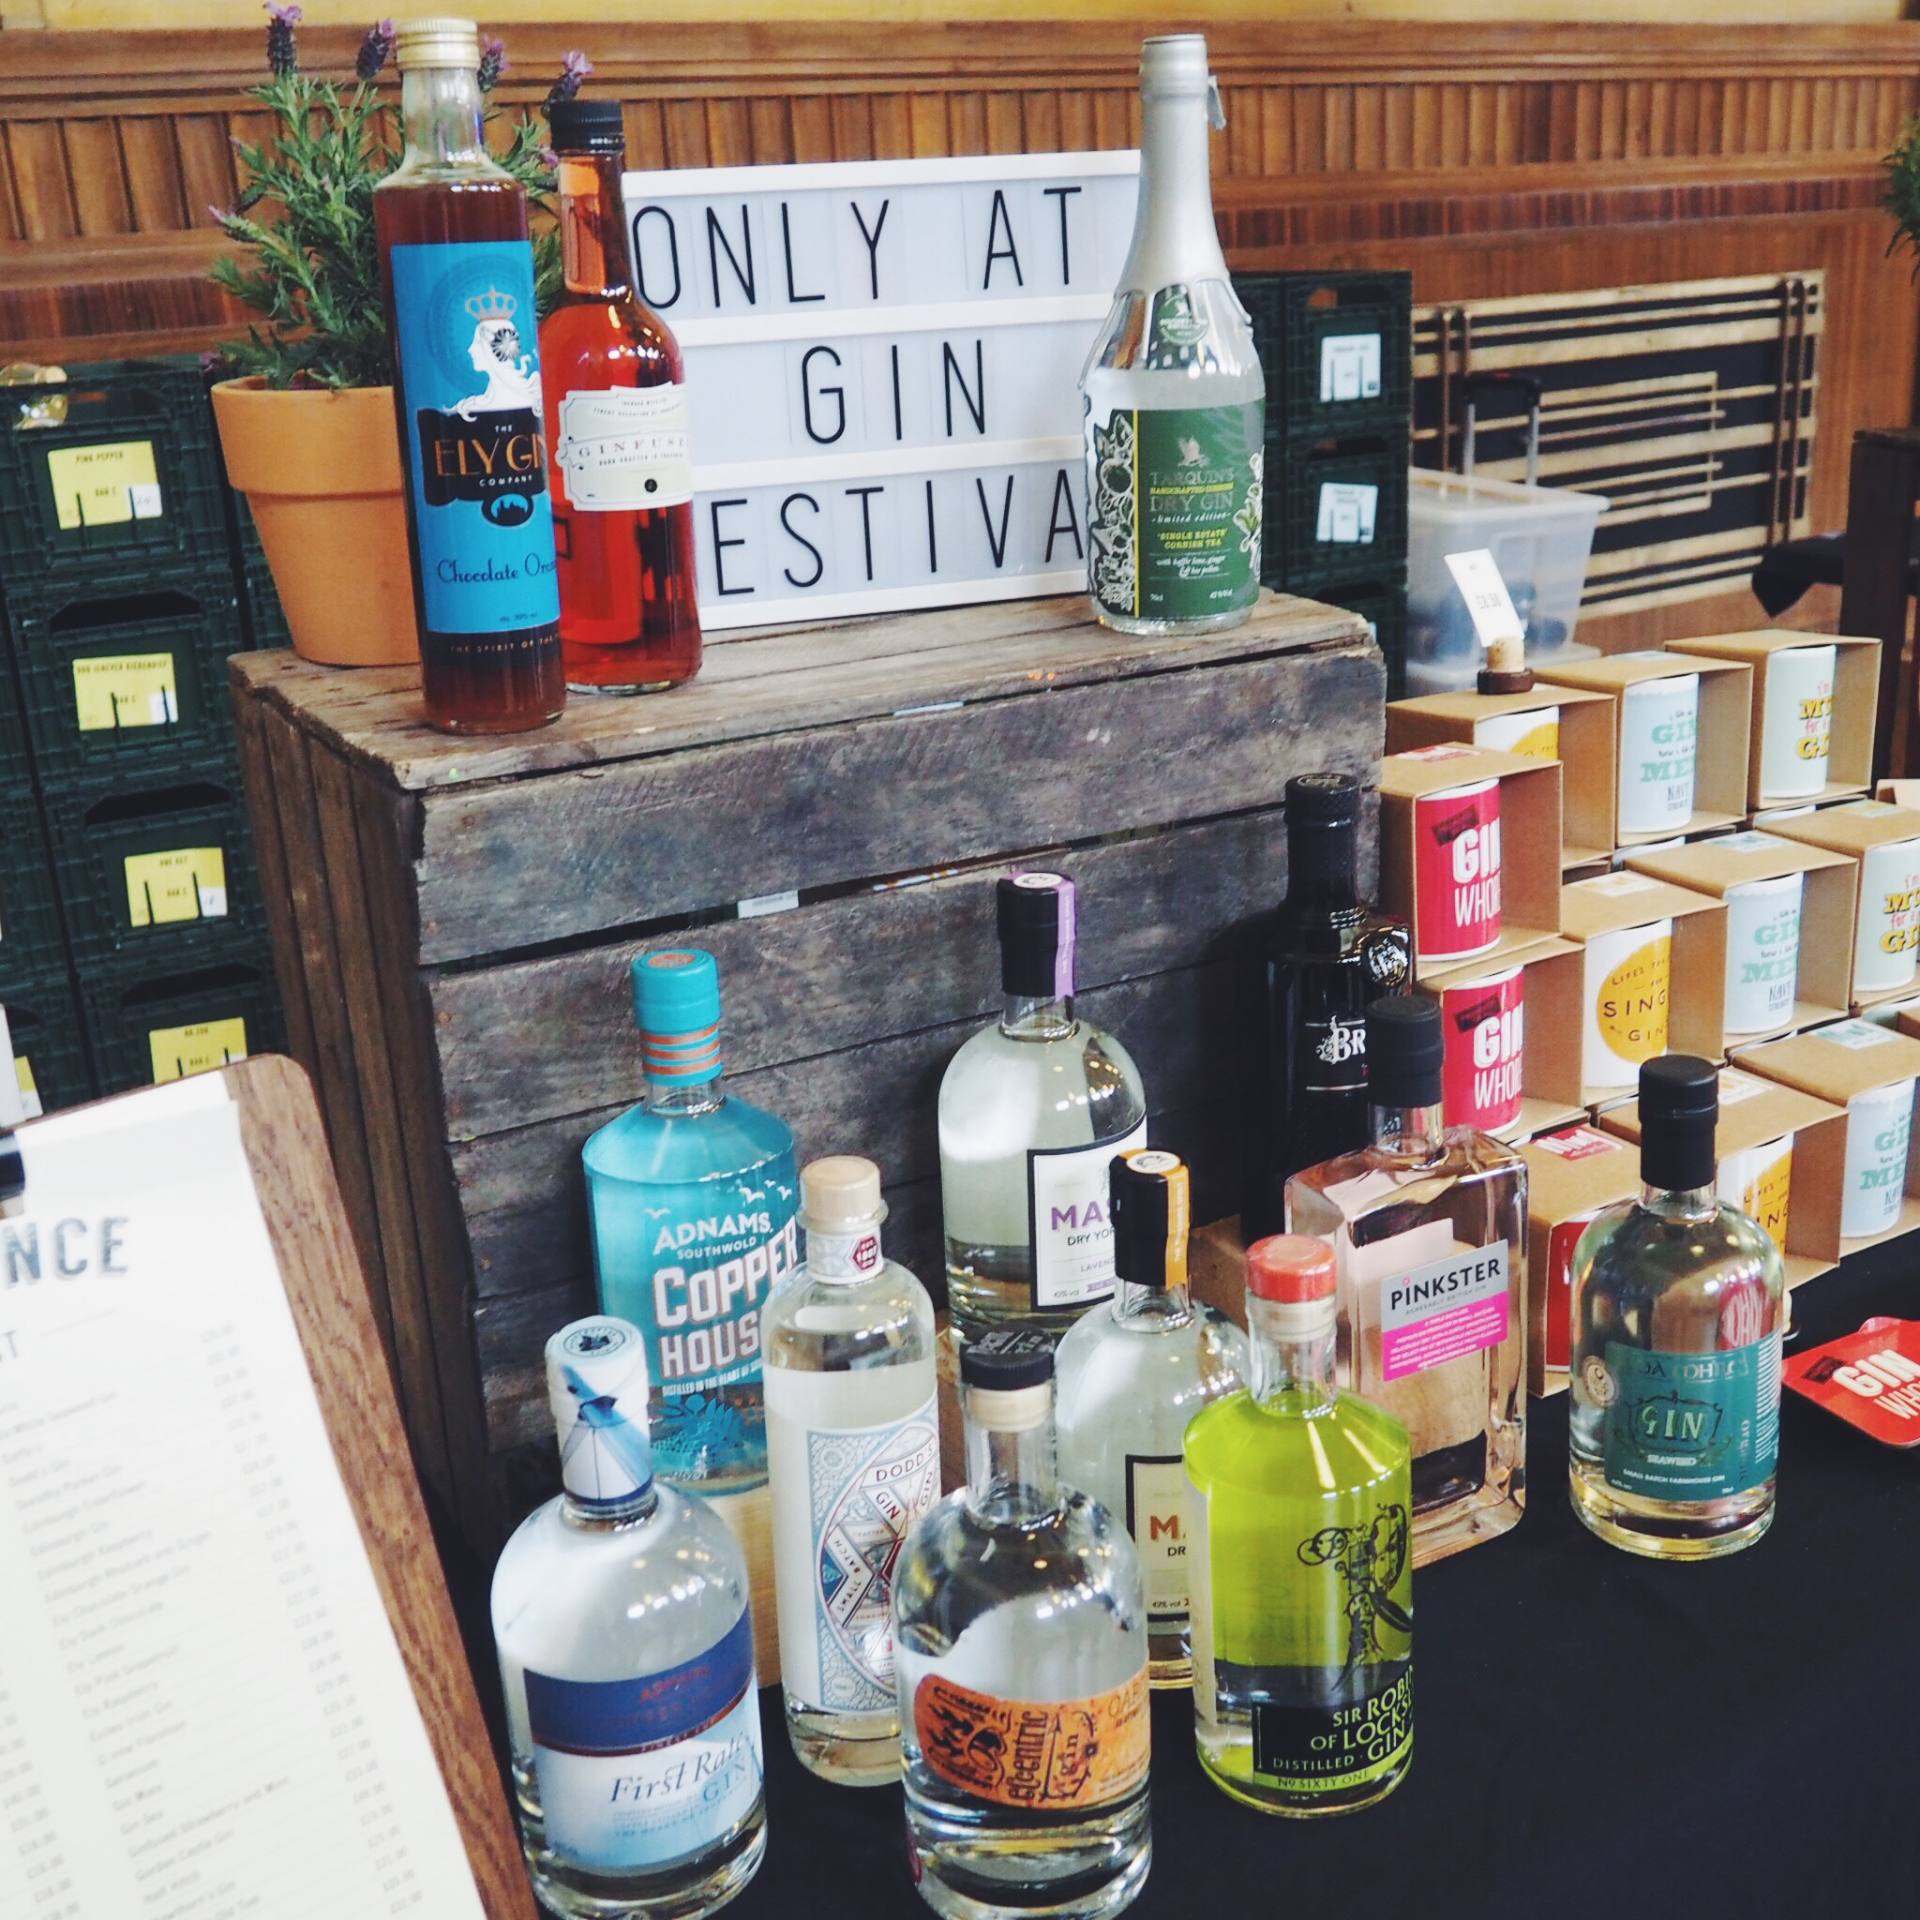 A picture of gins to buy at the Gin Festival